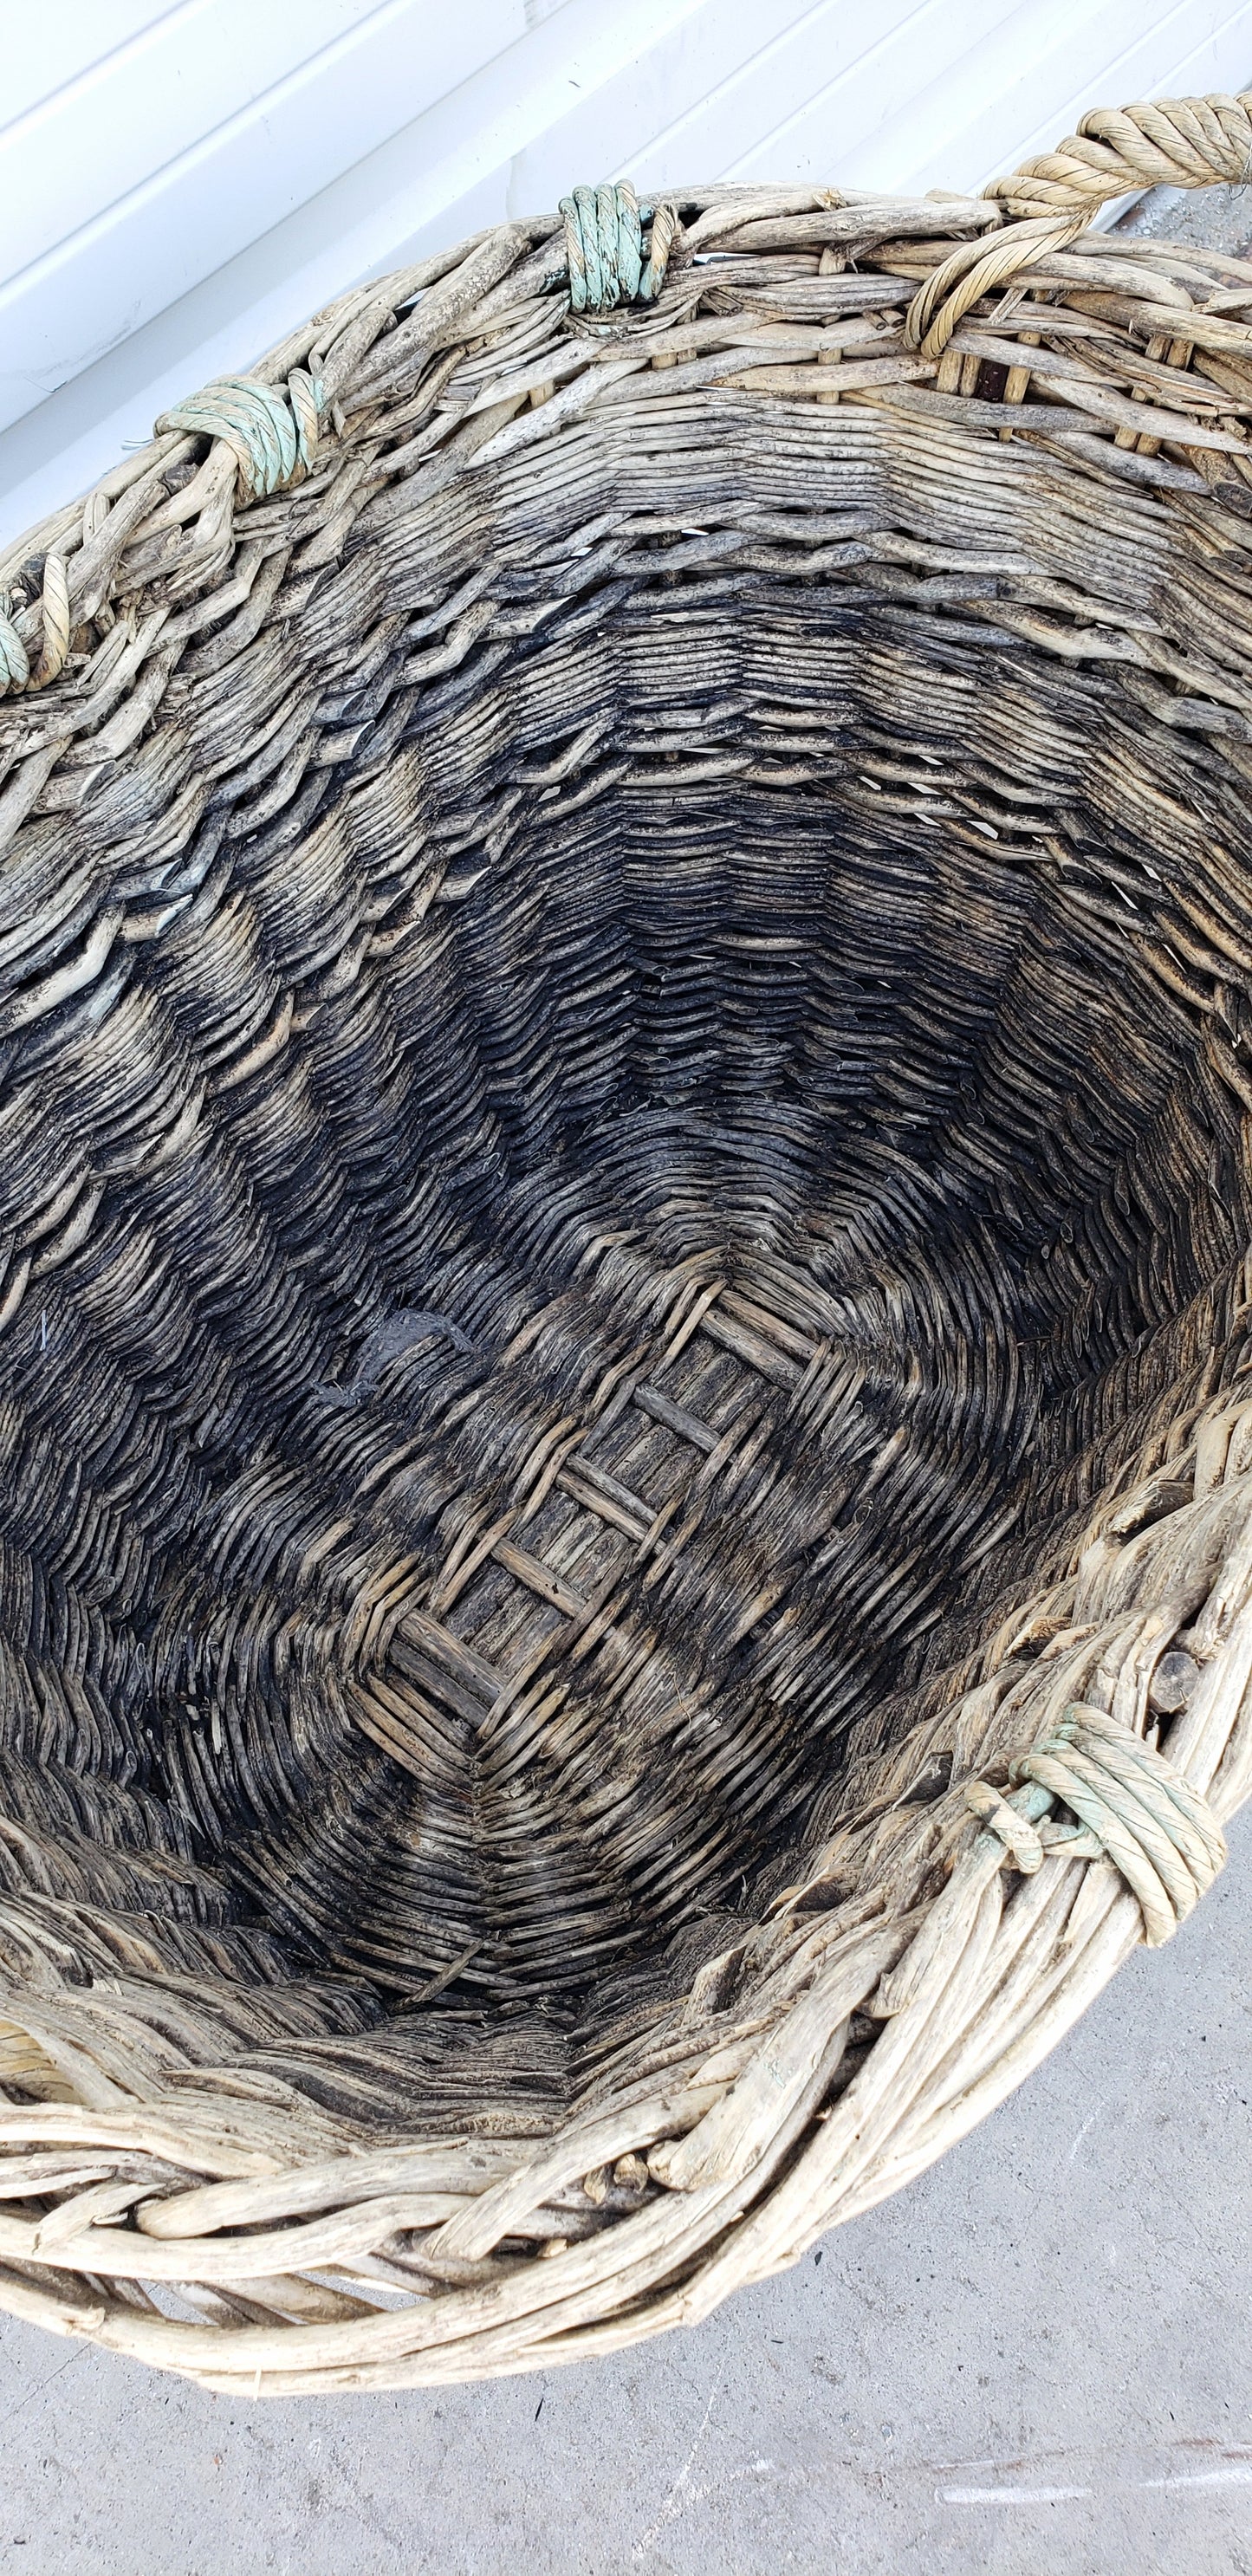 Large Wicker Champagne Basket from Vézinnes, France